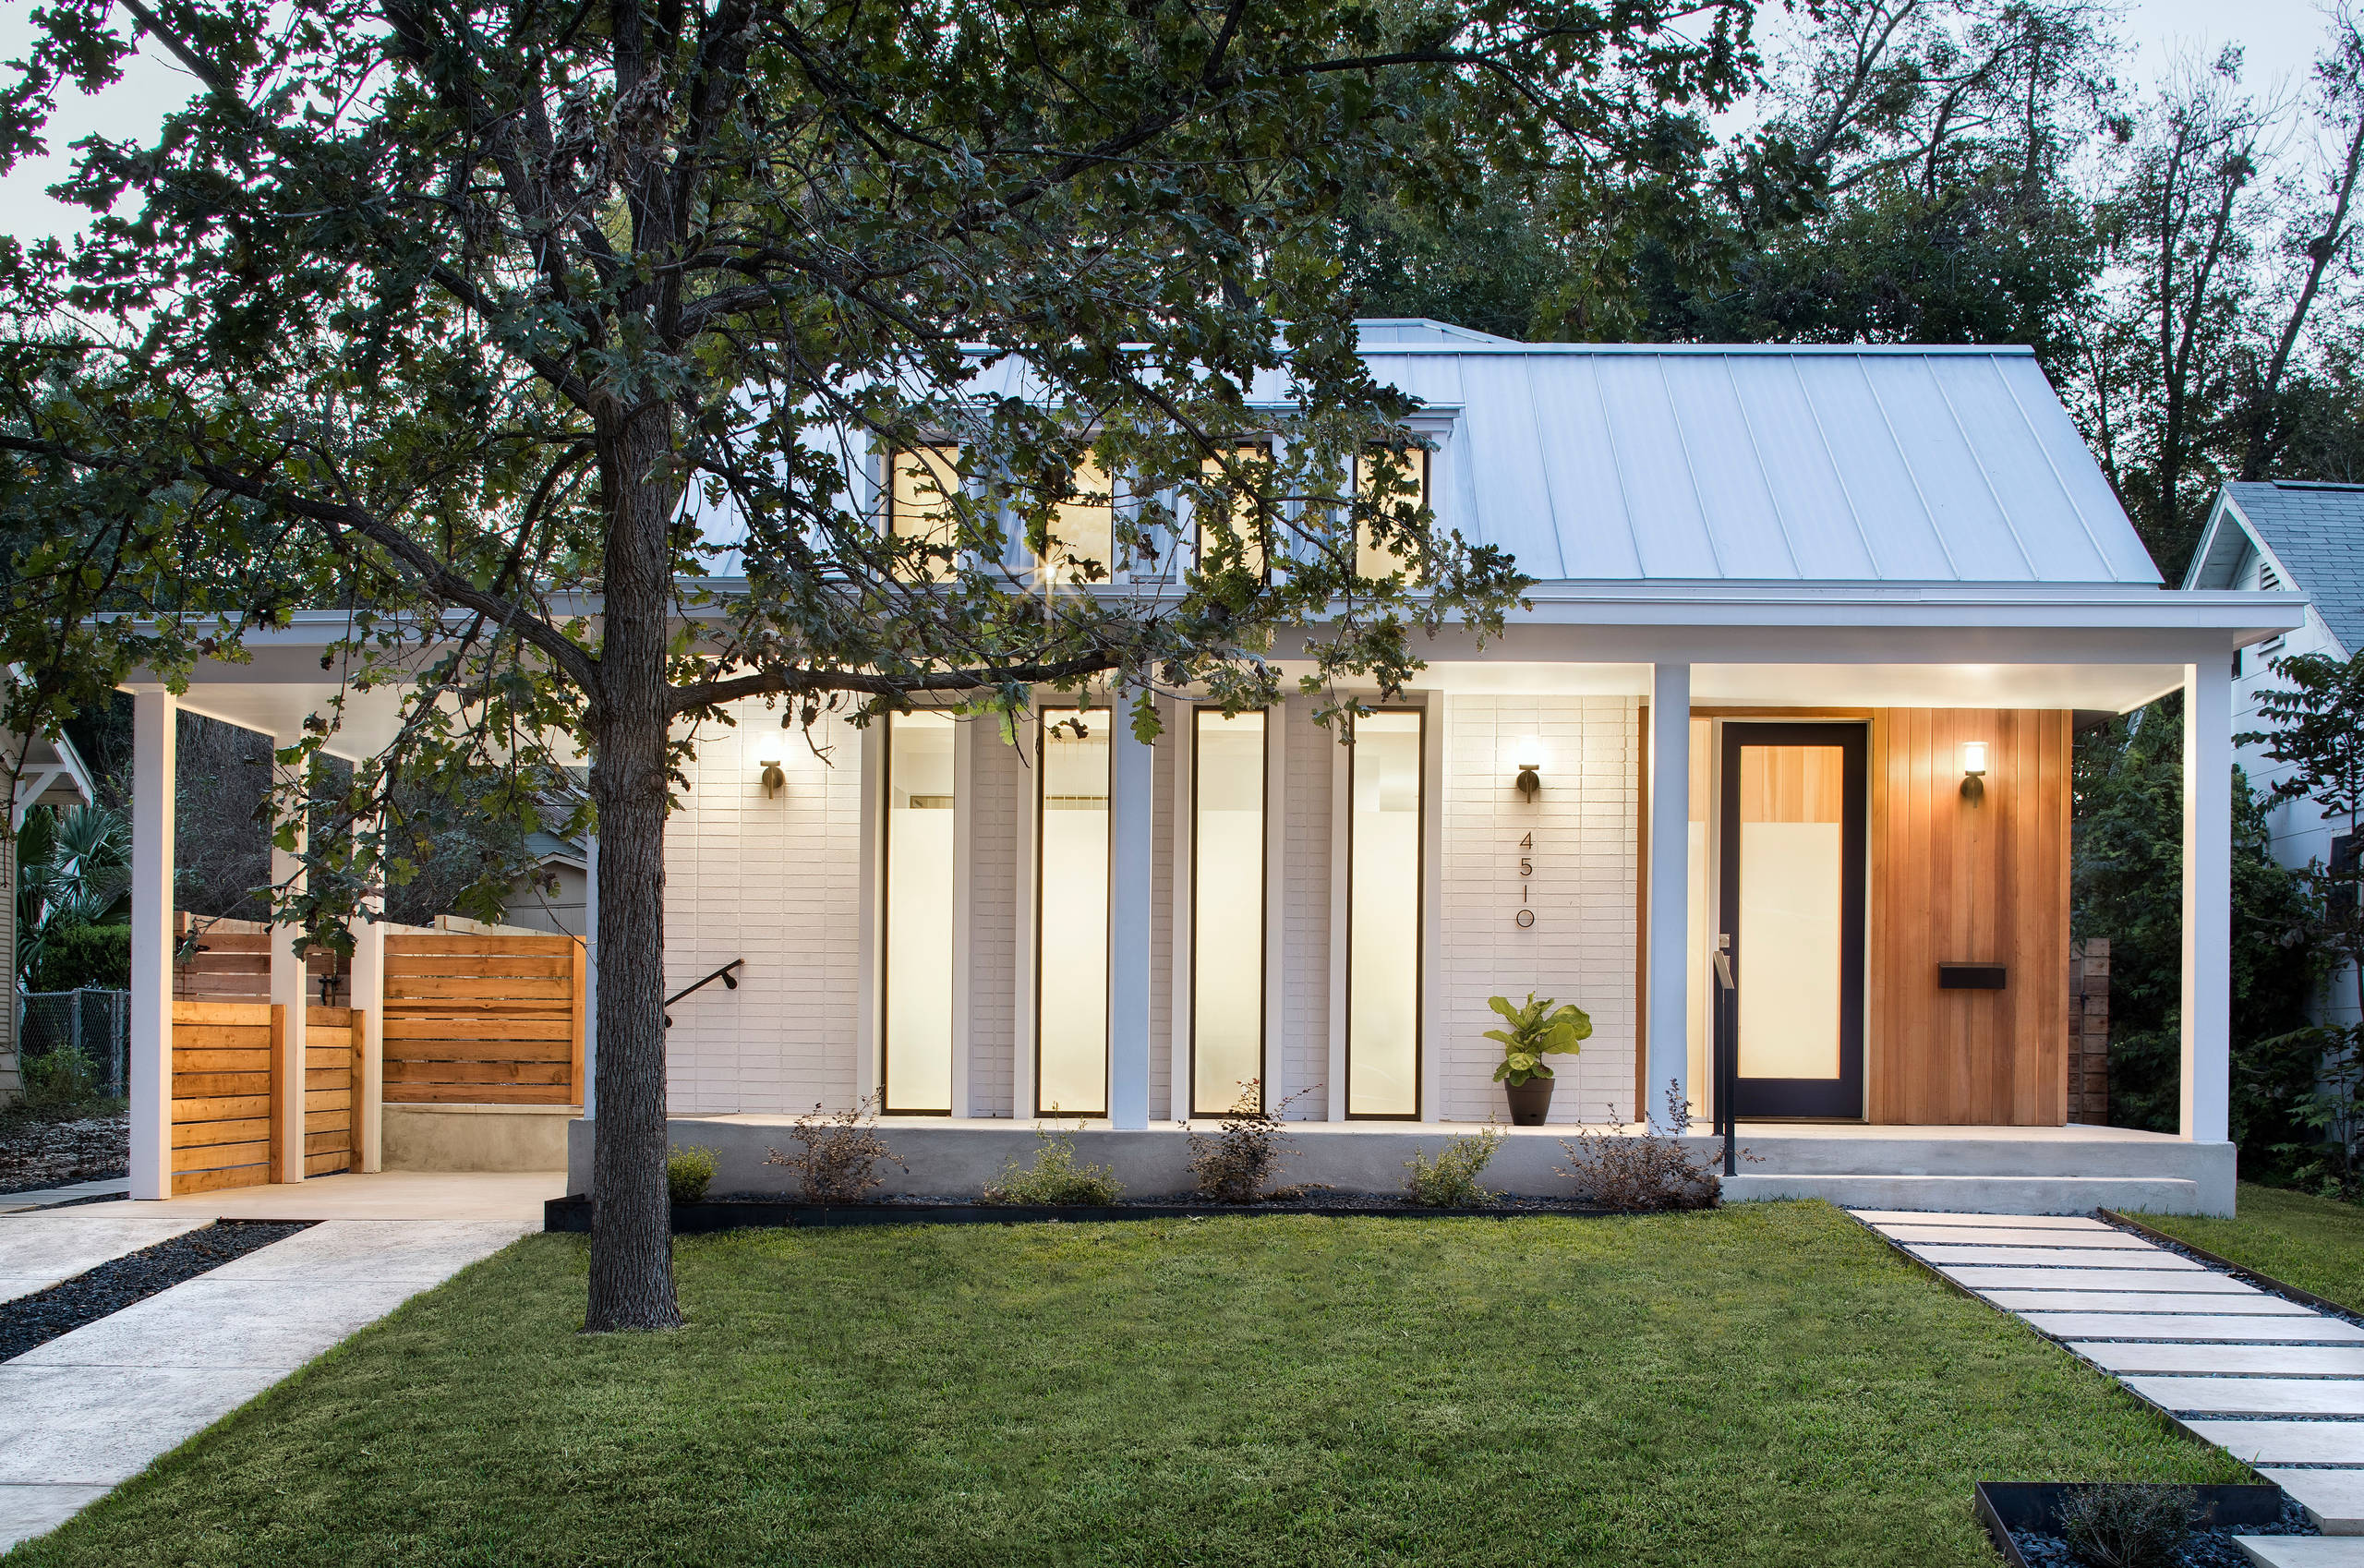 75 Beautiful Small Contemporary Exterior Home Pictures Ideas October 2020 Houzz